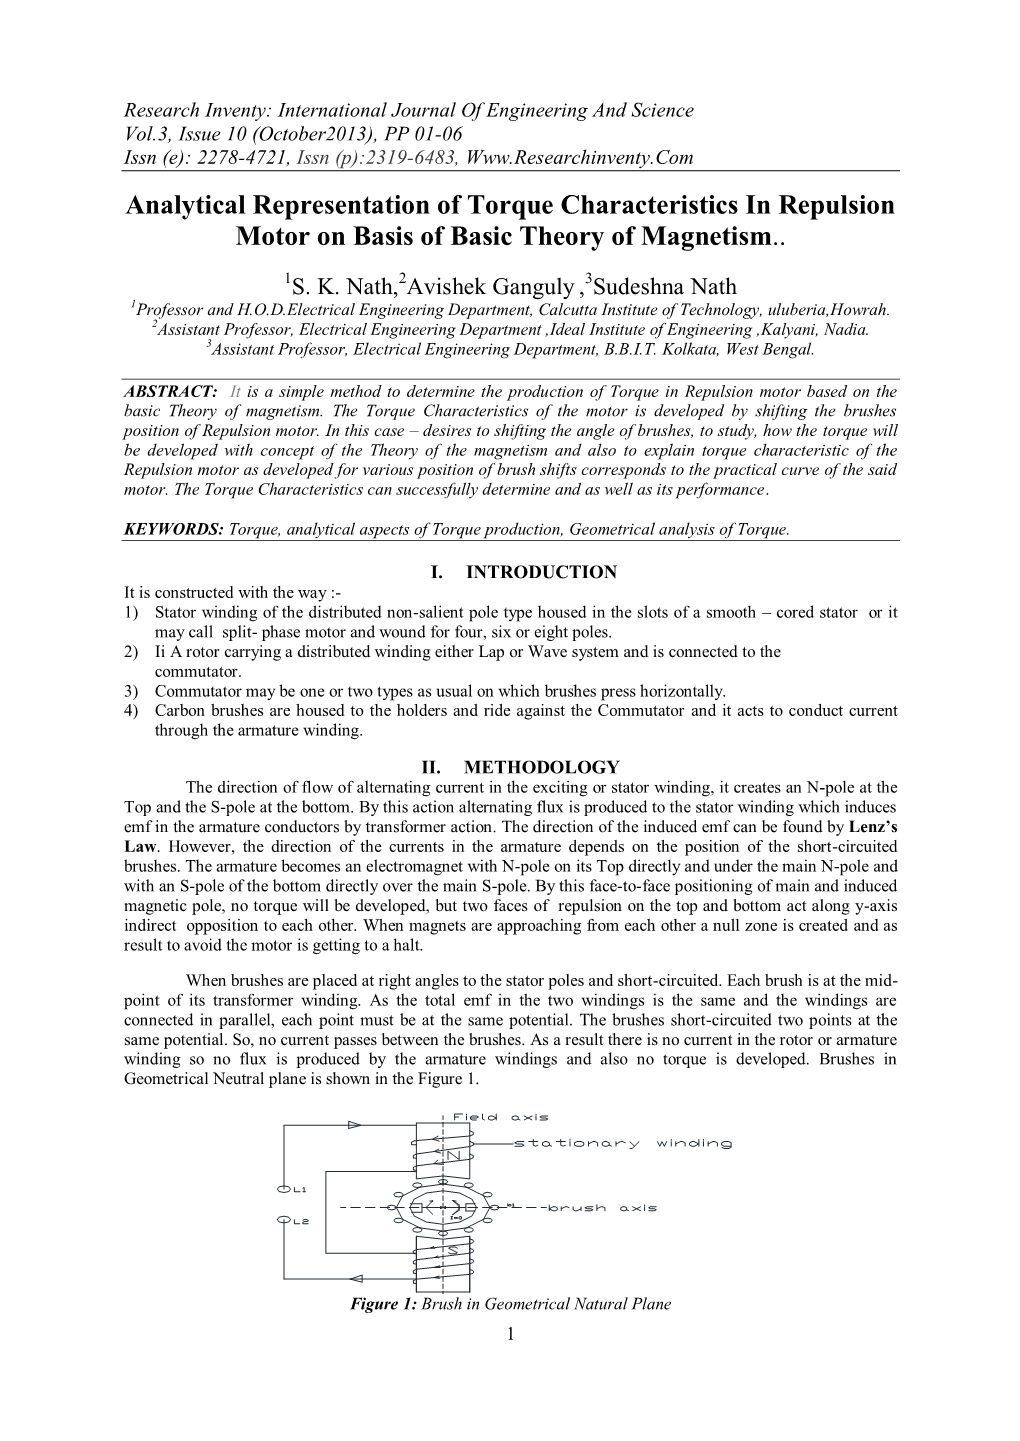 Analytical Representation of Torque Characteristics in Repulsion Motor on Basis of Basic Theory of Magnetism